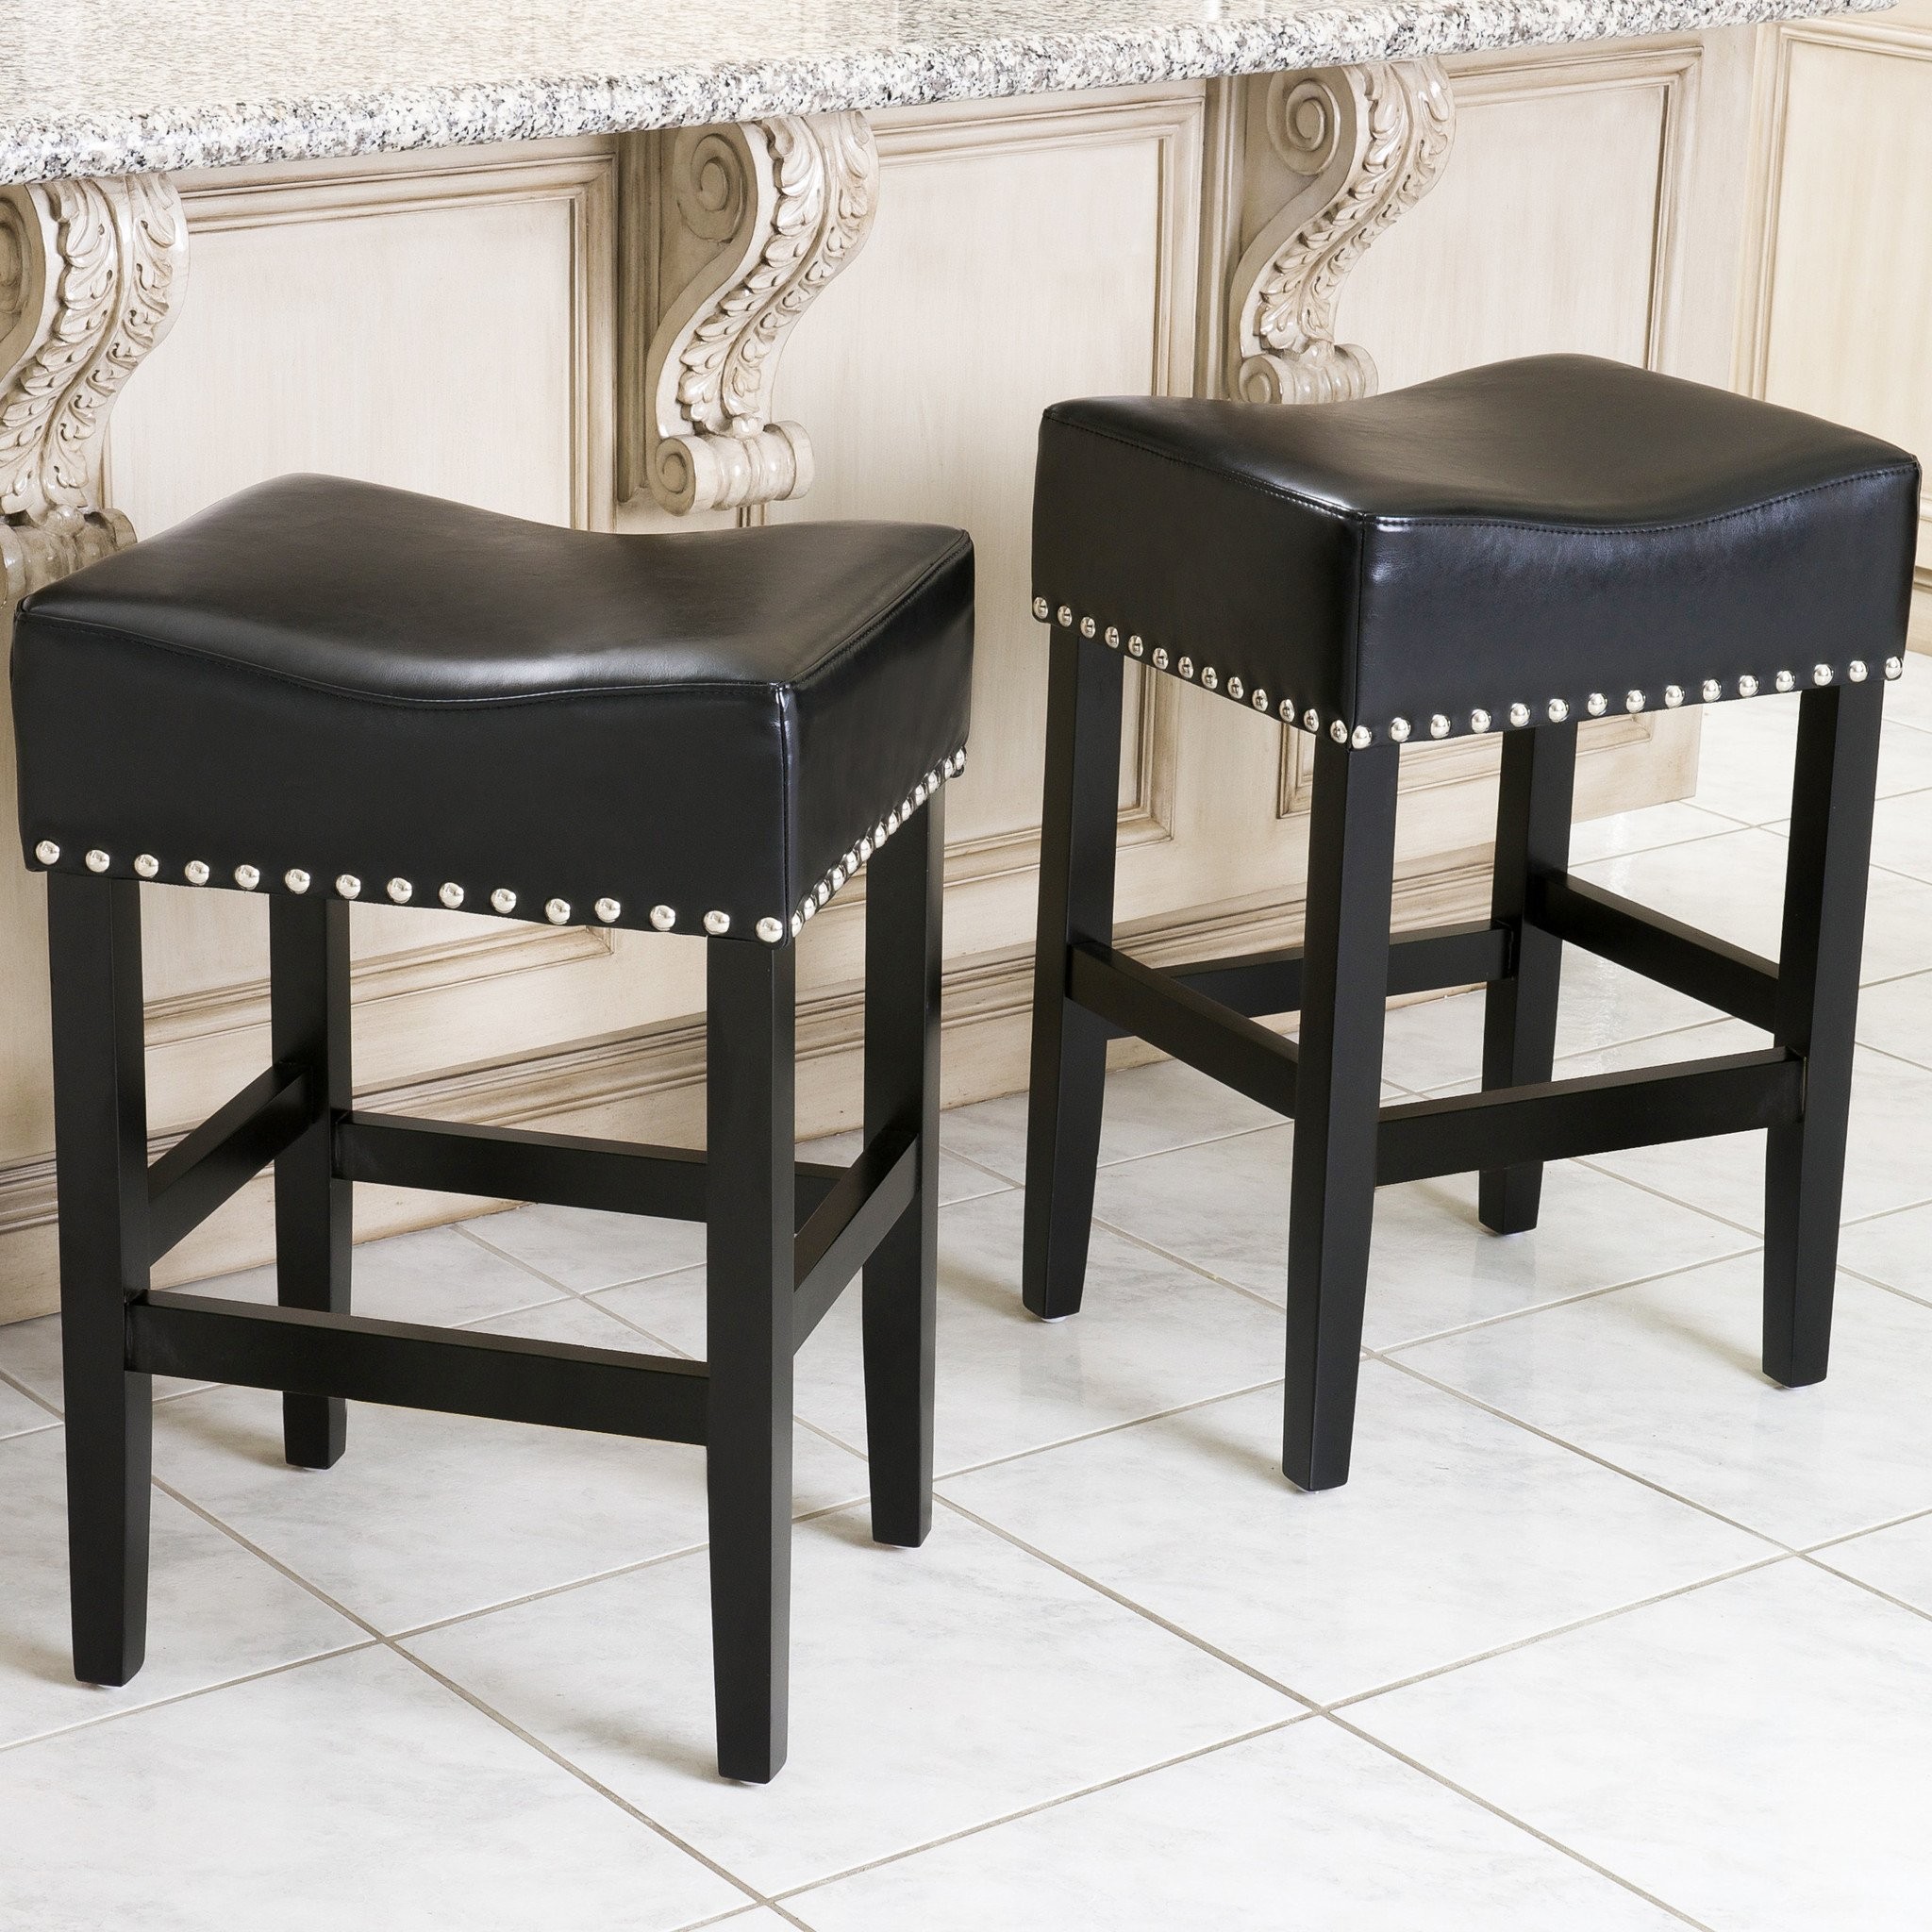 Chantal Black Leather Counter Stool (Set of 2)